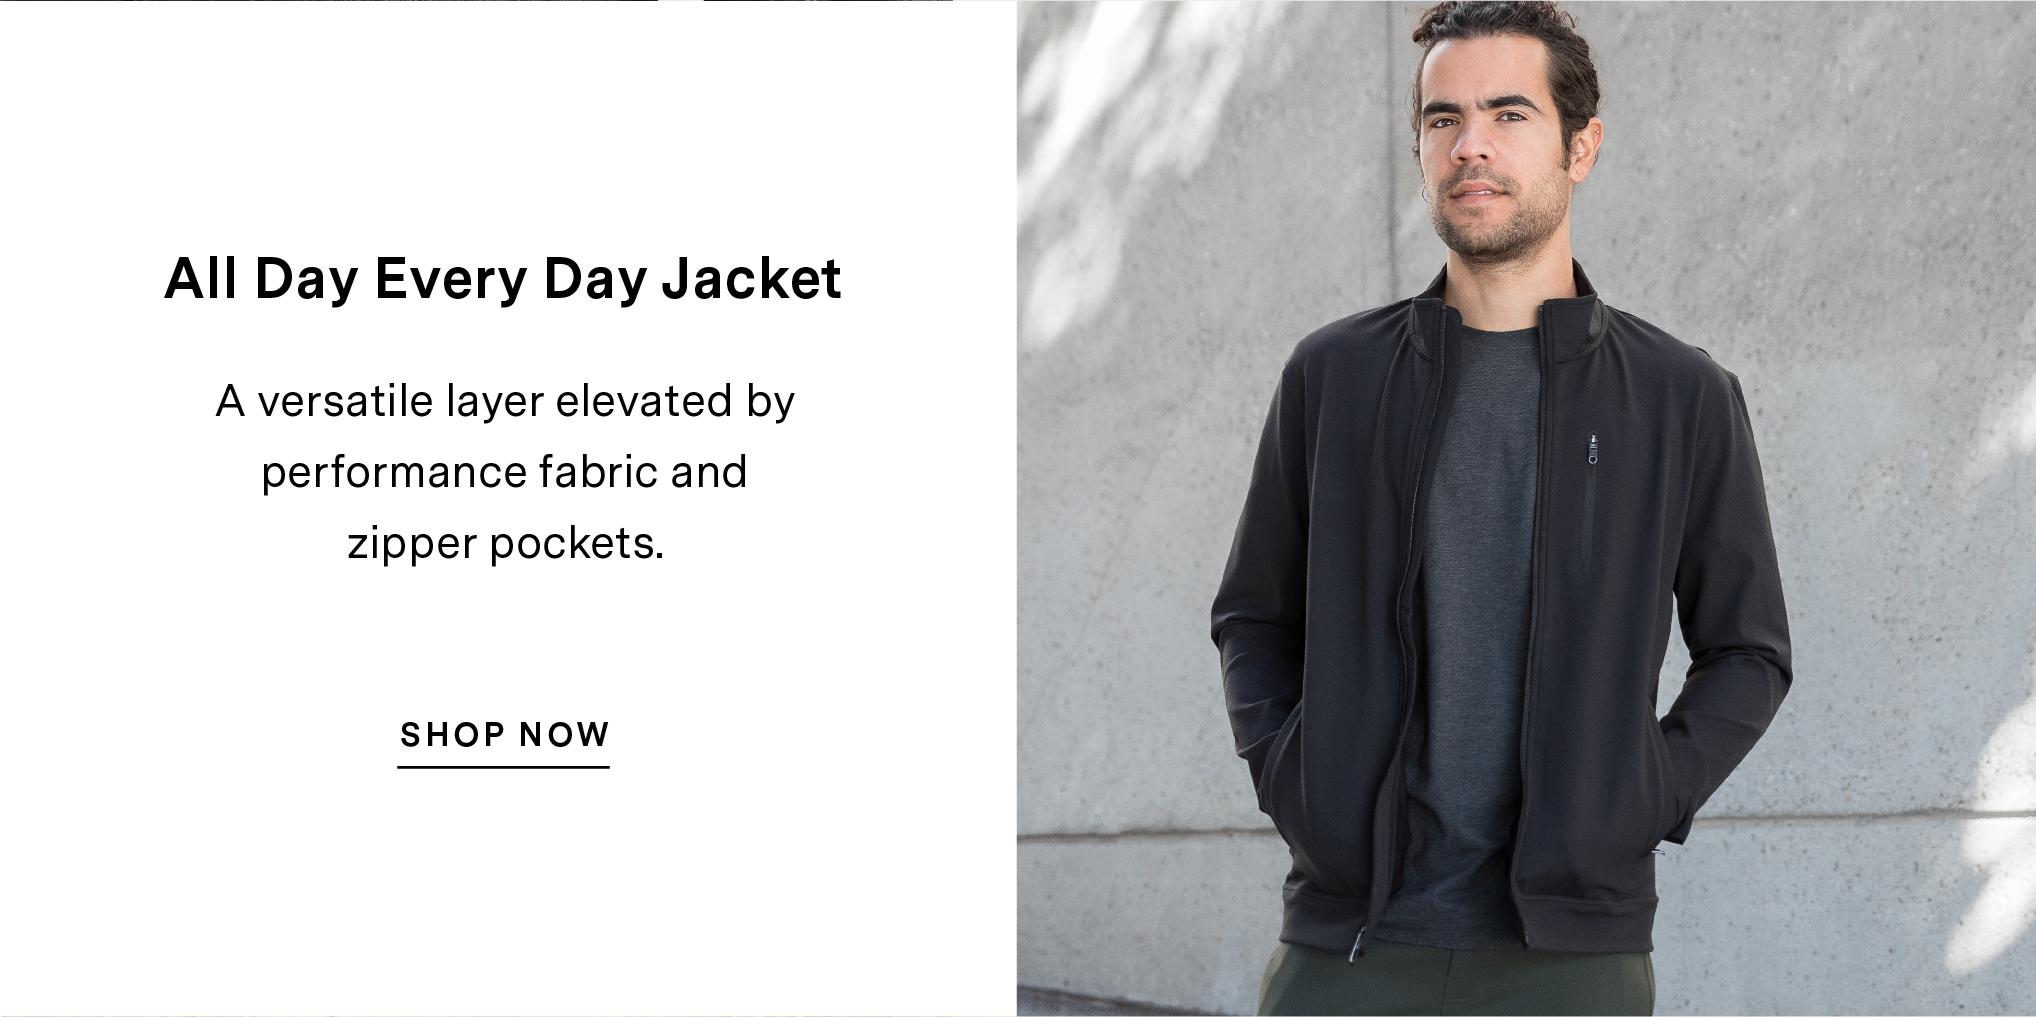 All Day Every Day Jacket - A versatile layer elevated by performance fabric and zipper pockets. 